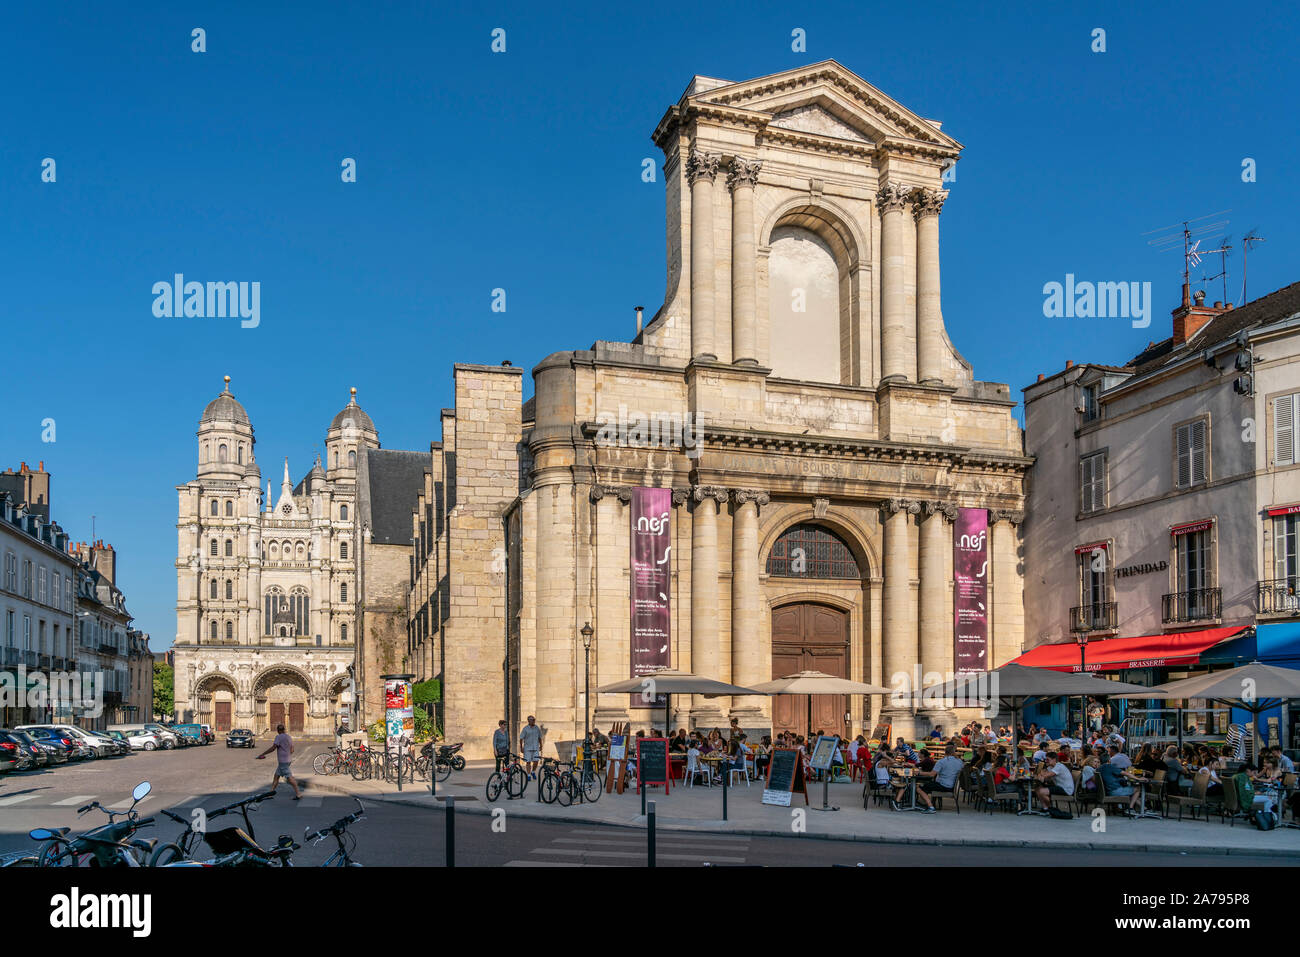 Cafe in front of the Nave of the Church of Sainte Bernadette, Central library, Place of Theatre, background Saint Michel church, Dijon, Burgundy, Fran Stock Photo